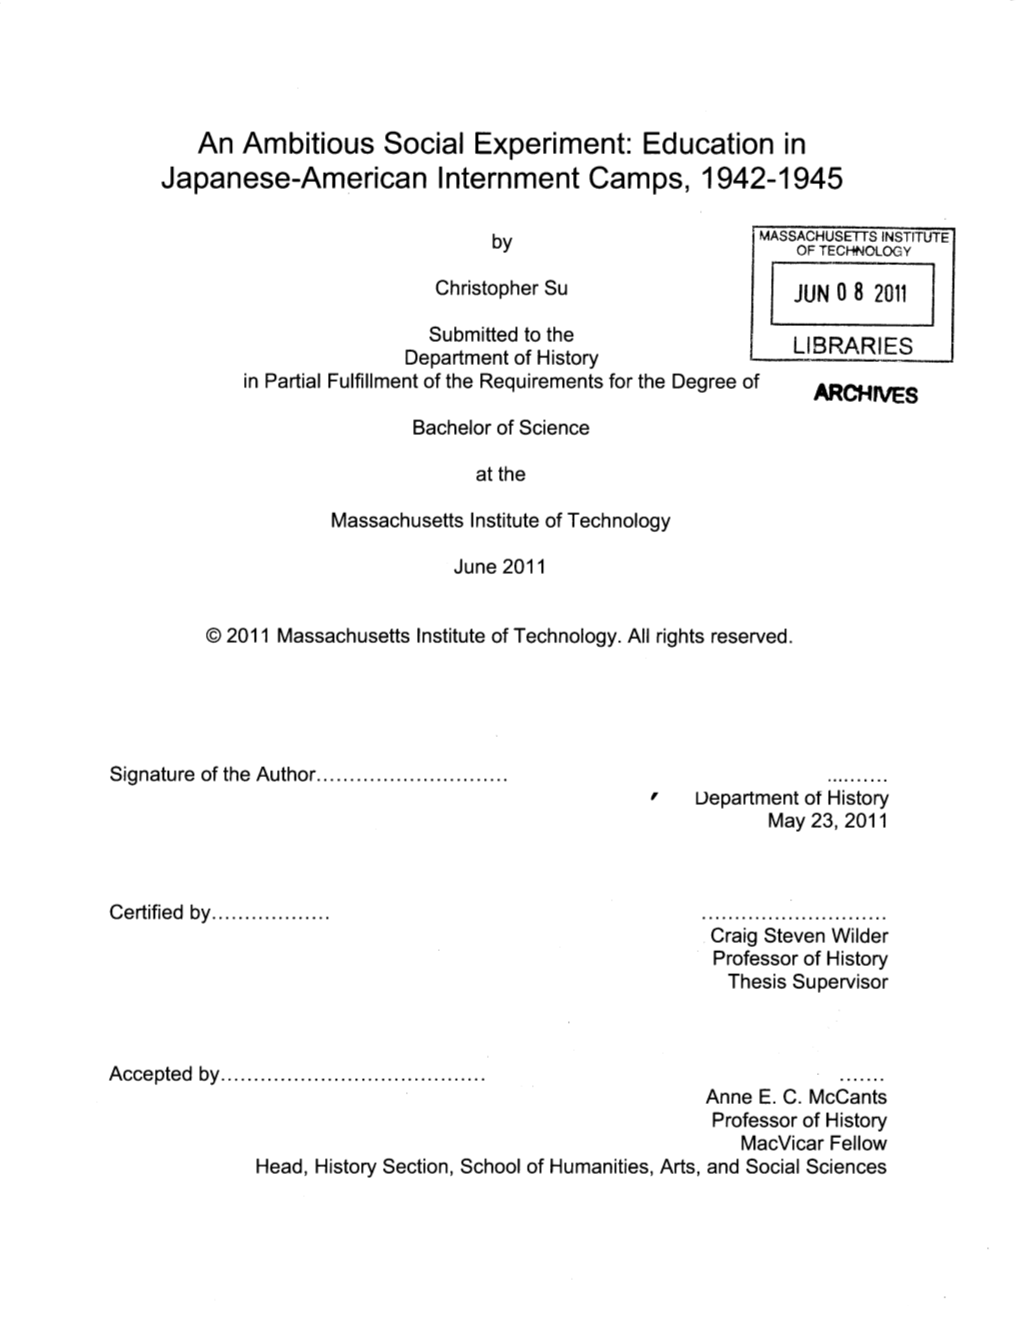 Education in Japanese-American Internment Camps, 1942-1945